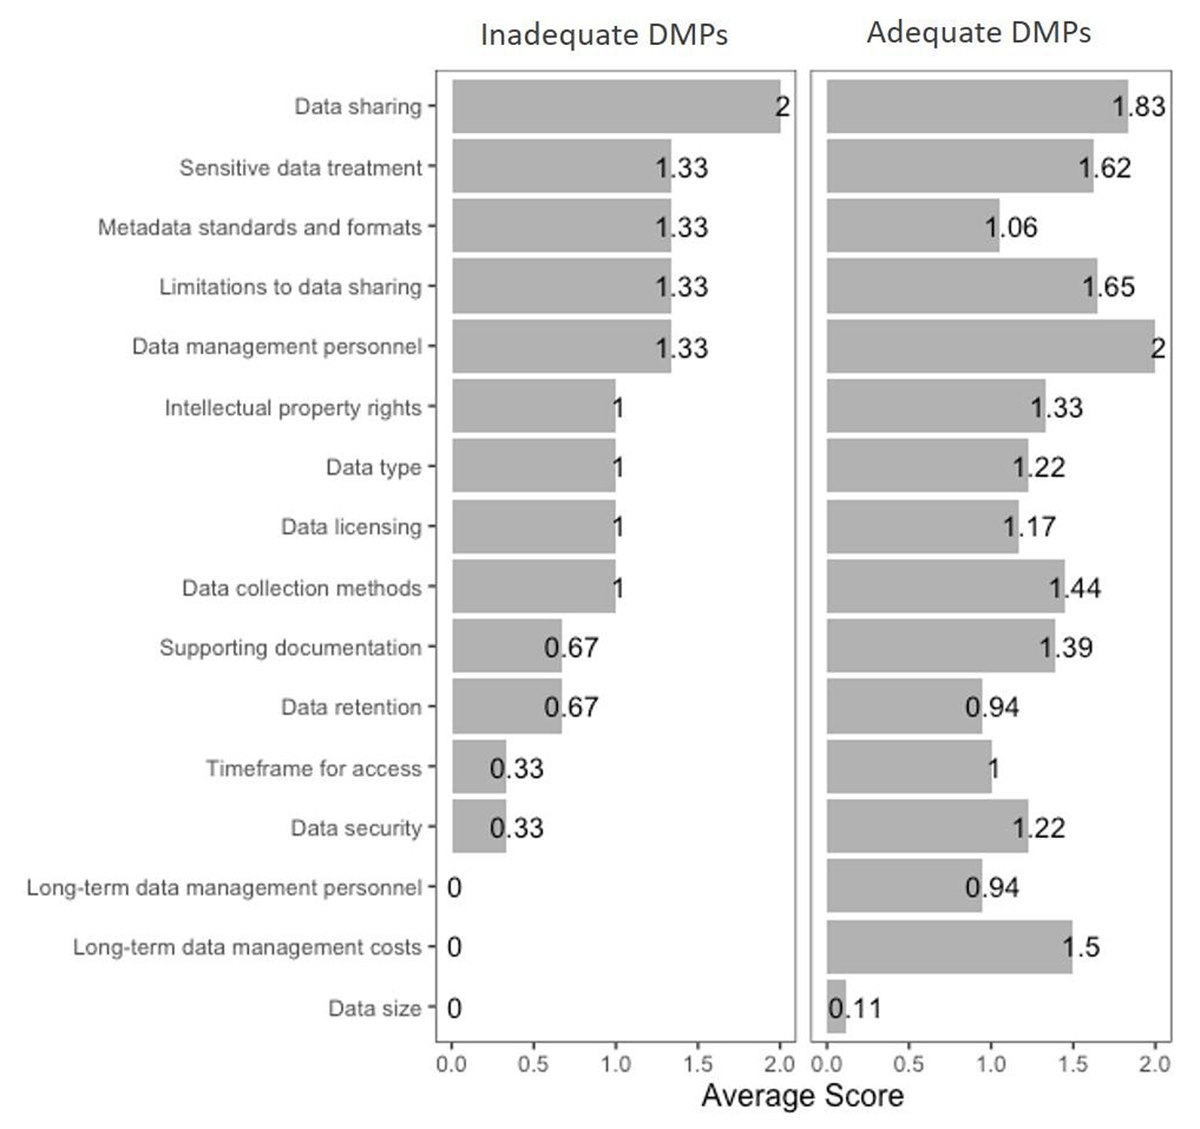 Average scores by scorecard criterion for adequate and inadequate DMPs